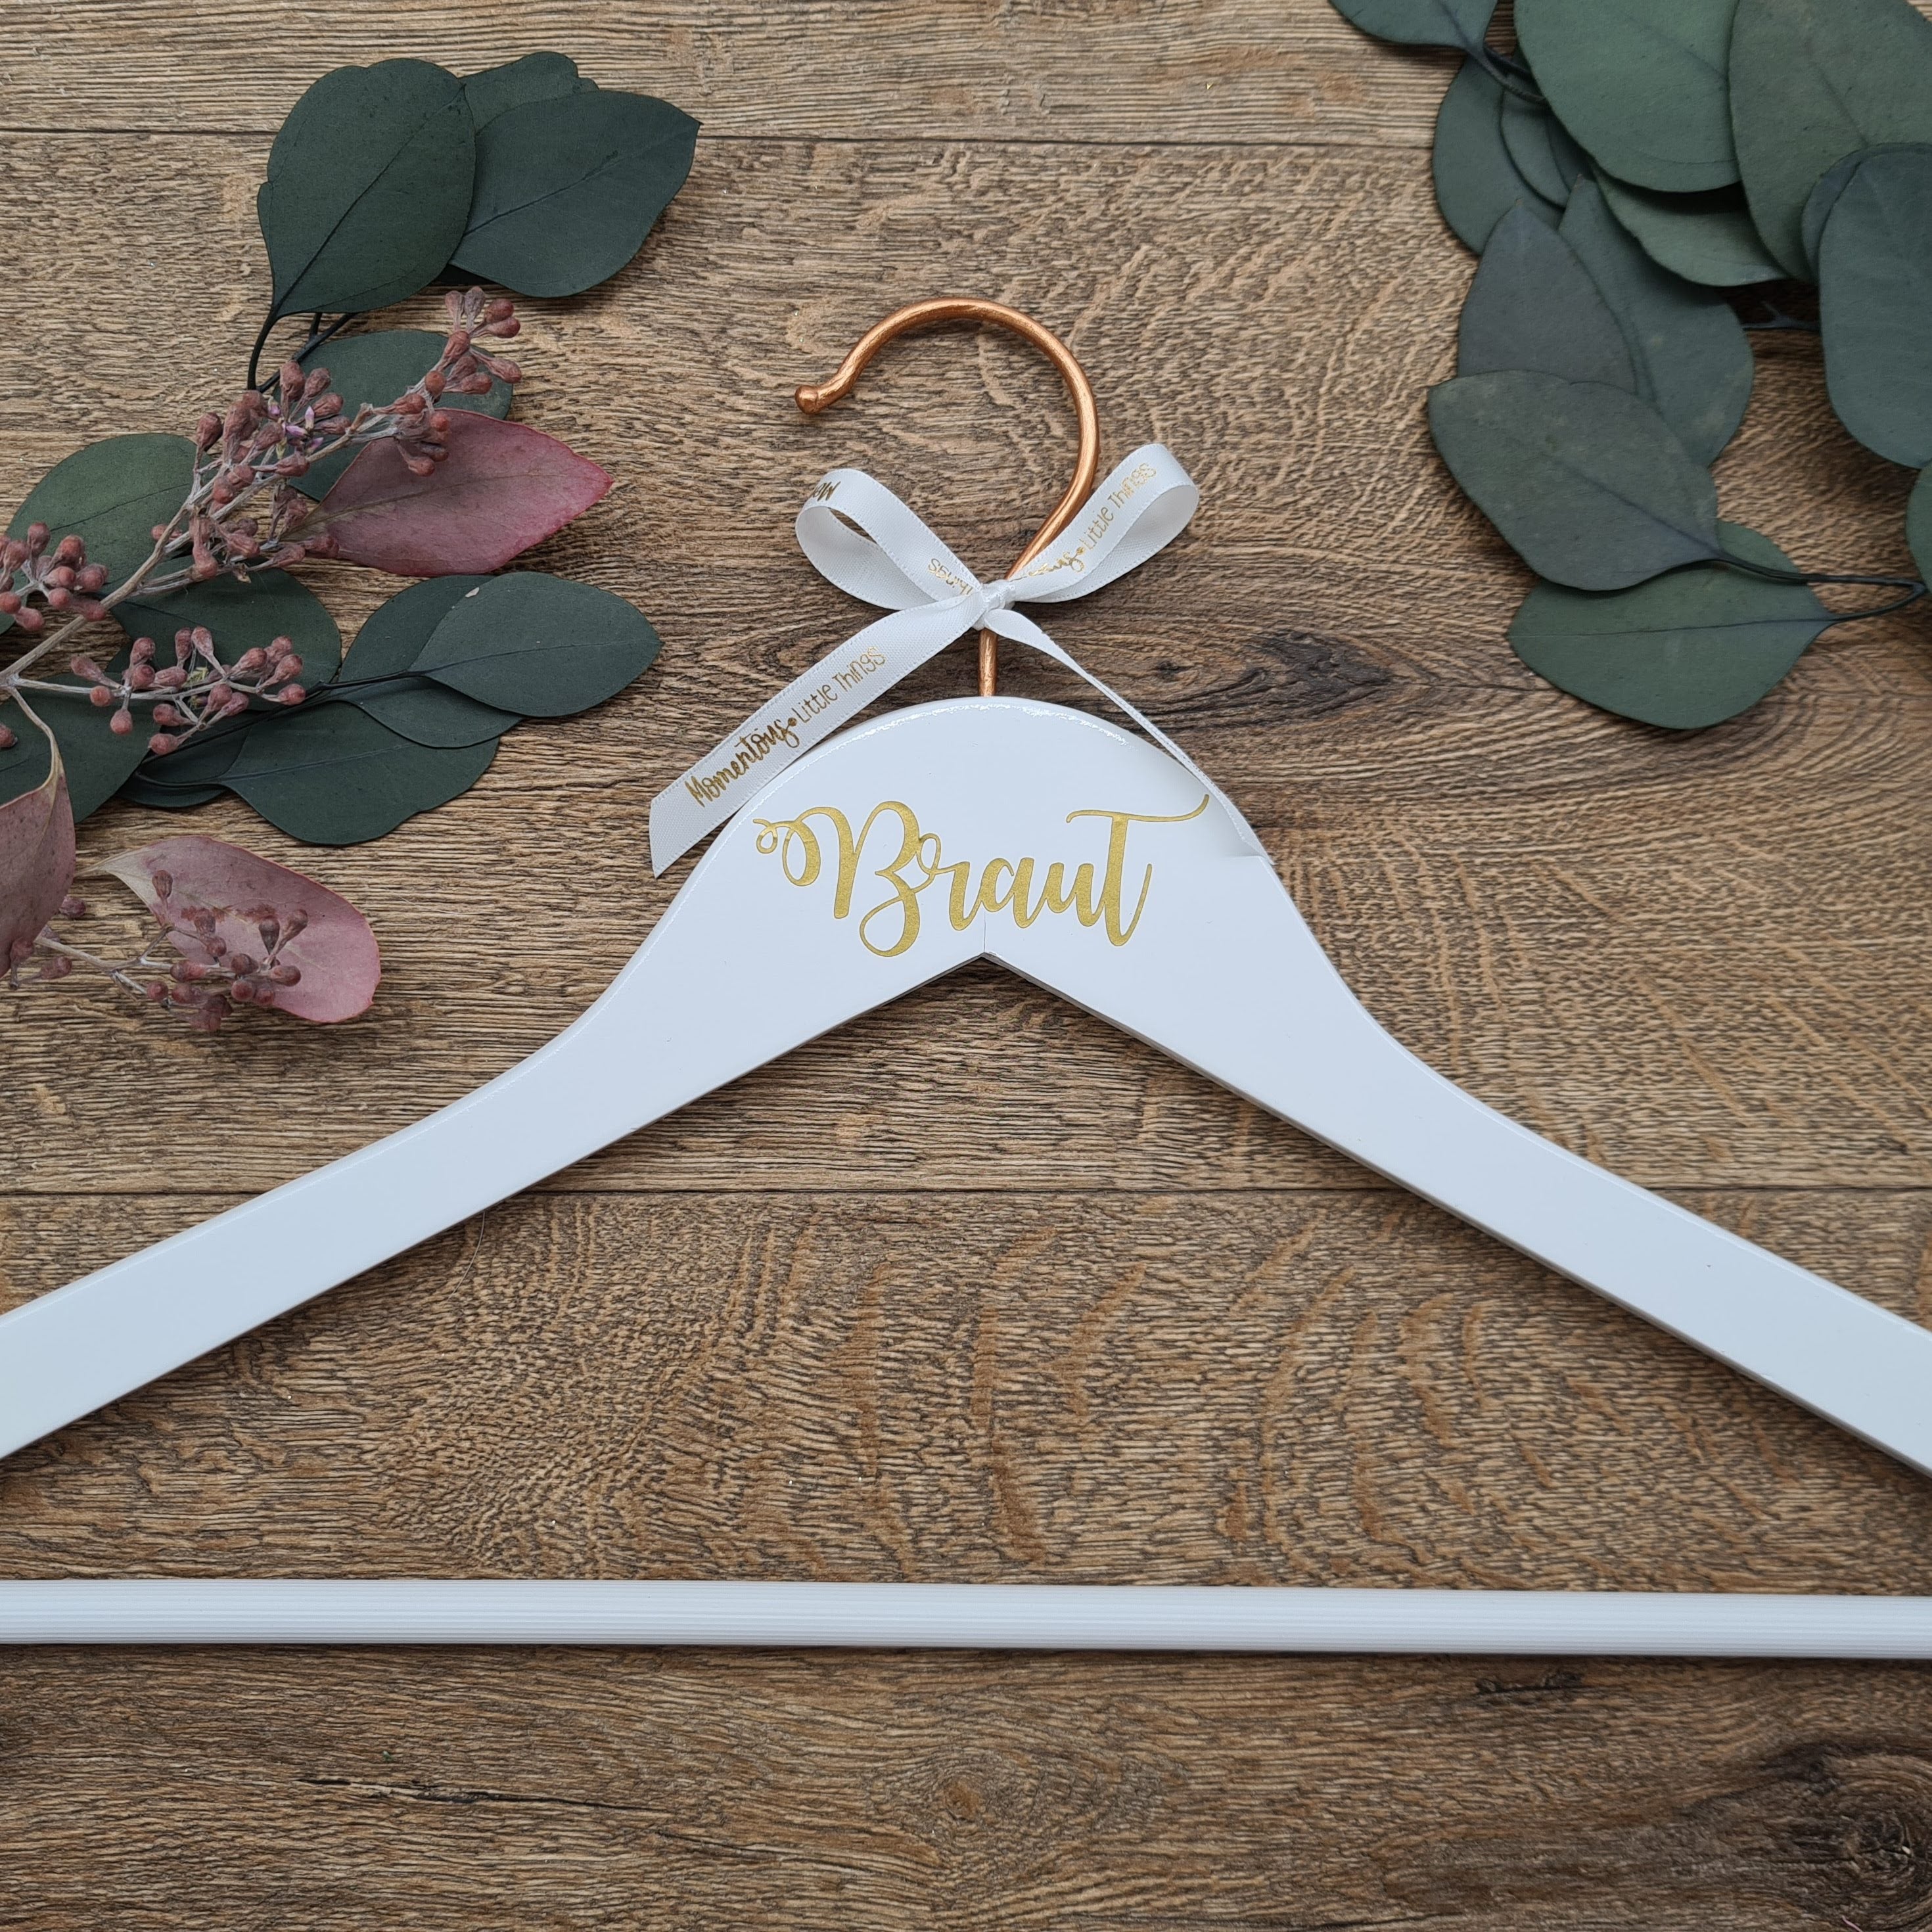 Wedding dress Hanger for Bride with Copper Hook and Gold Text with "Braut"